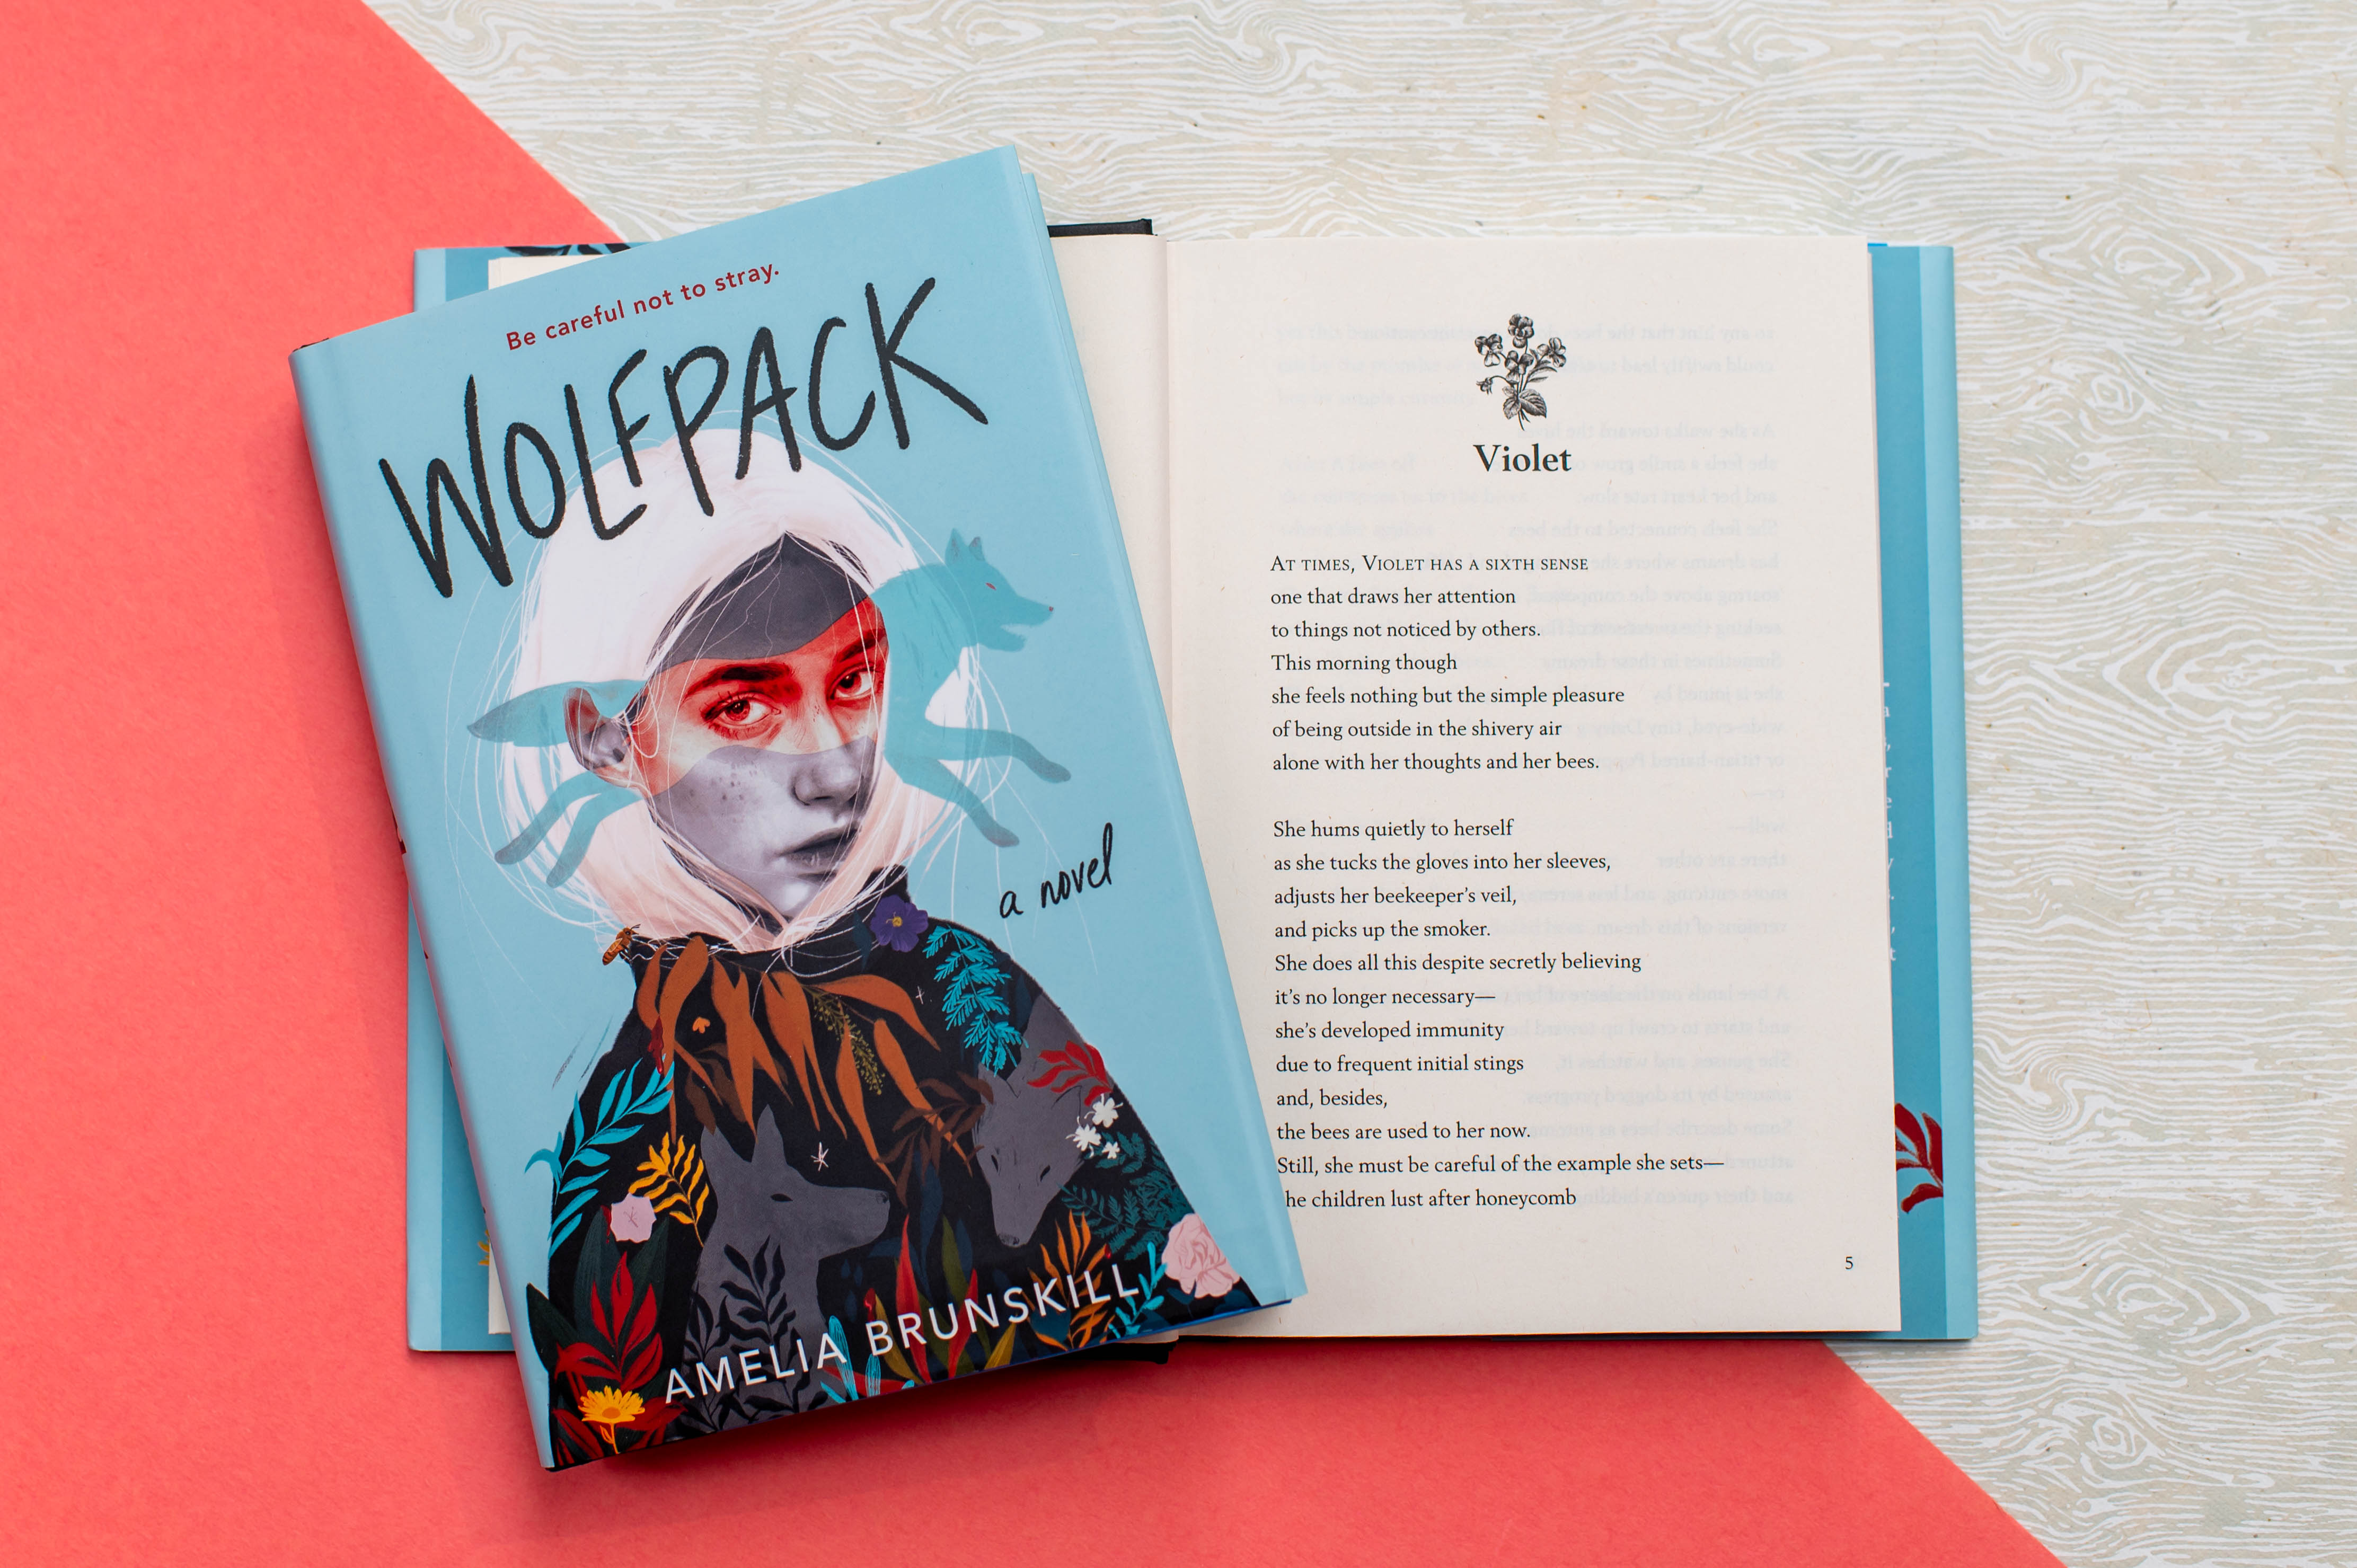 NOVL - Instagram image of the cover of the book 'Wolfpack' by Amelia Brunskill